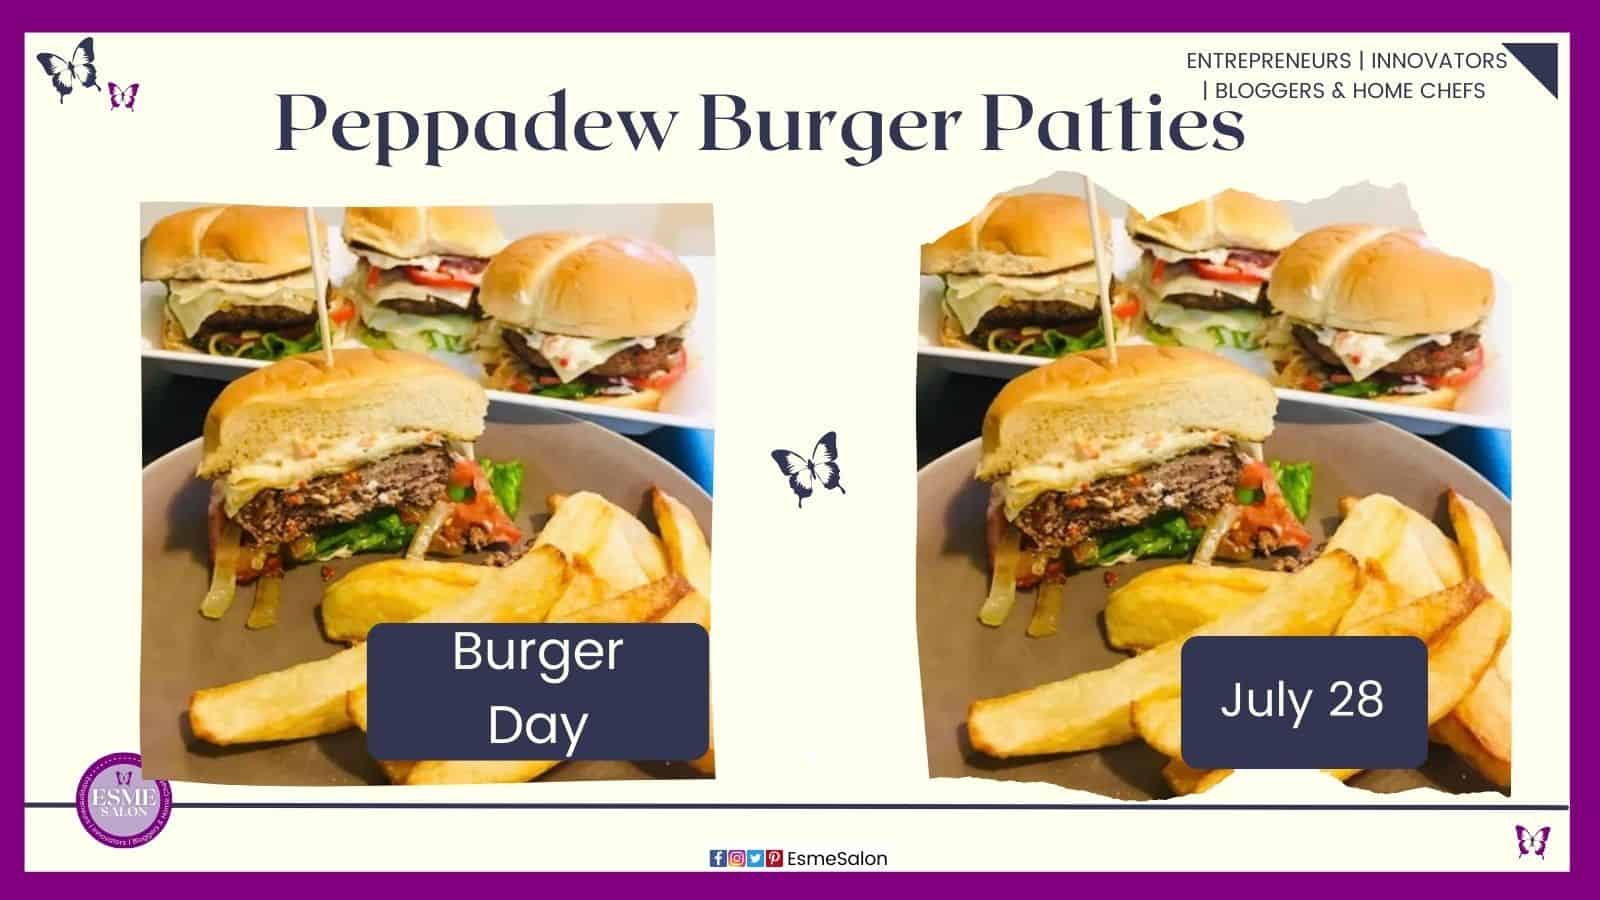 an image of Peppadew Burger Patties with some fries